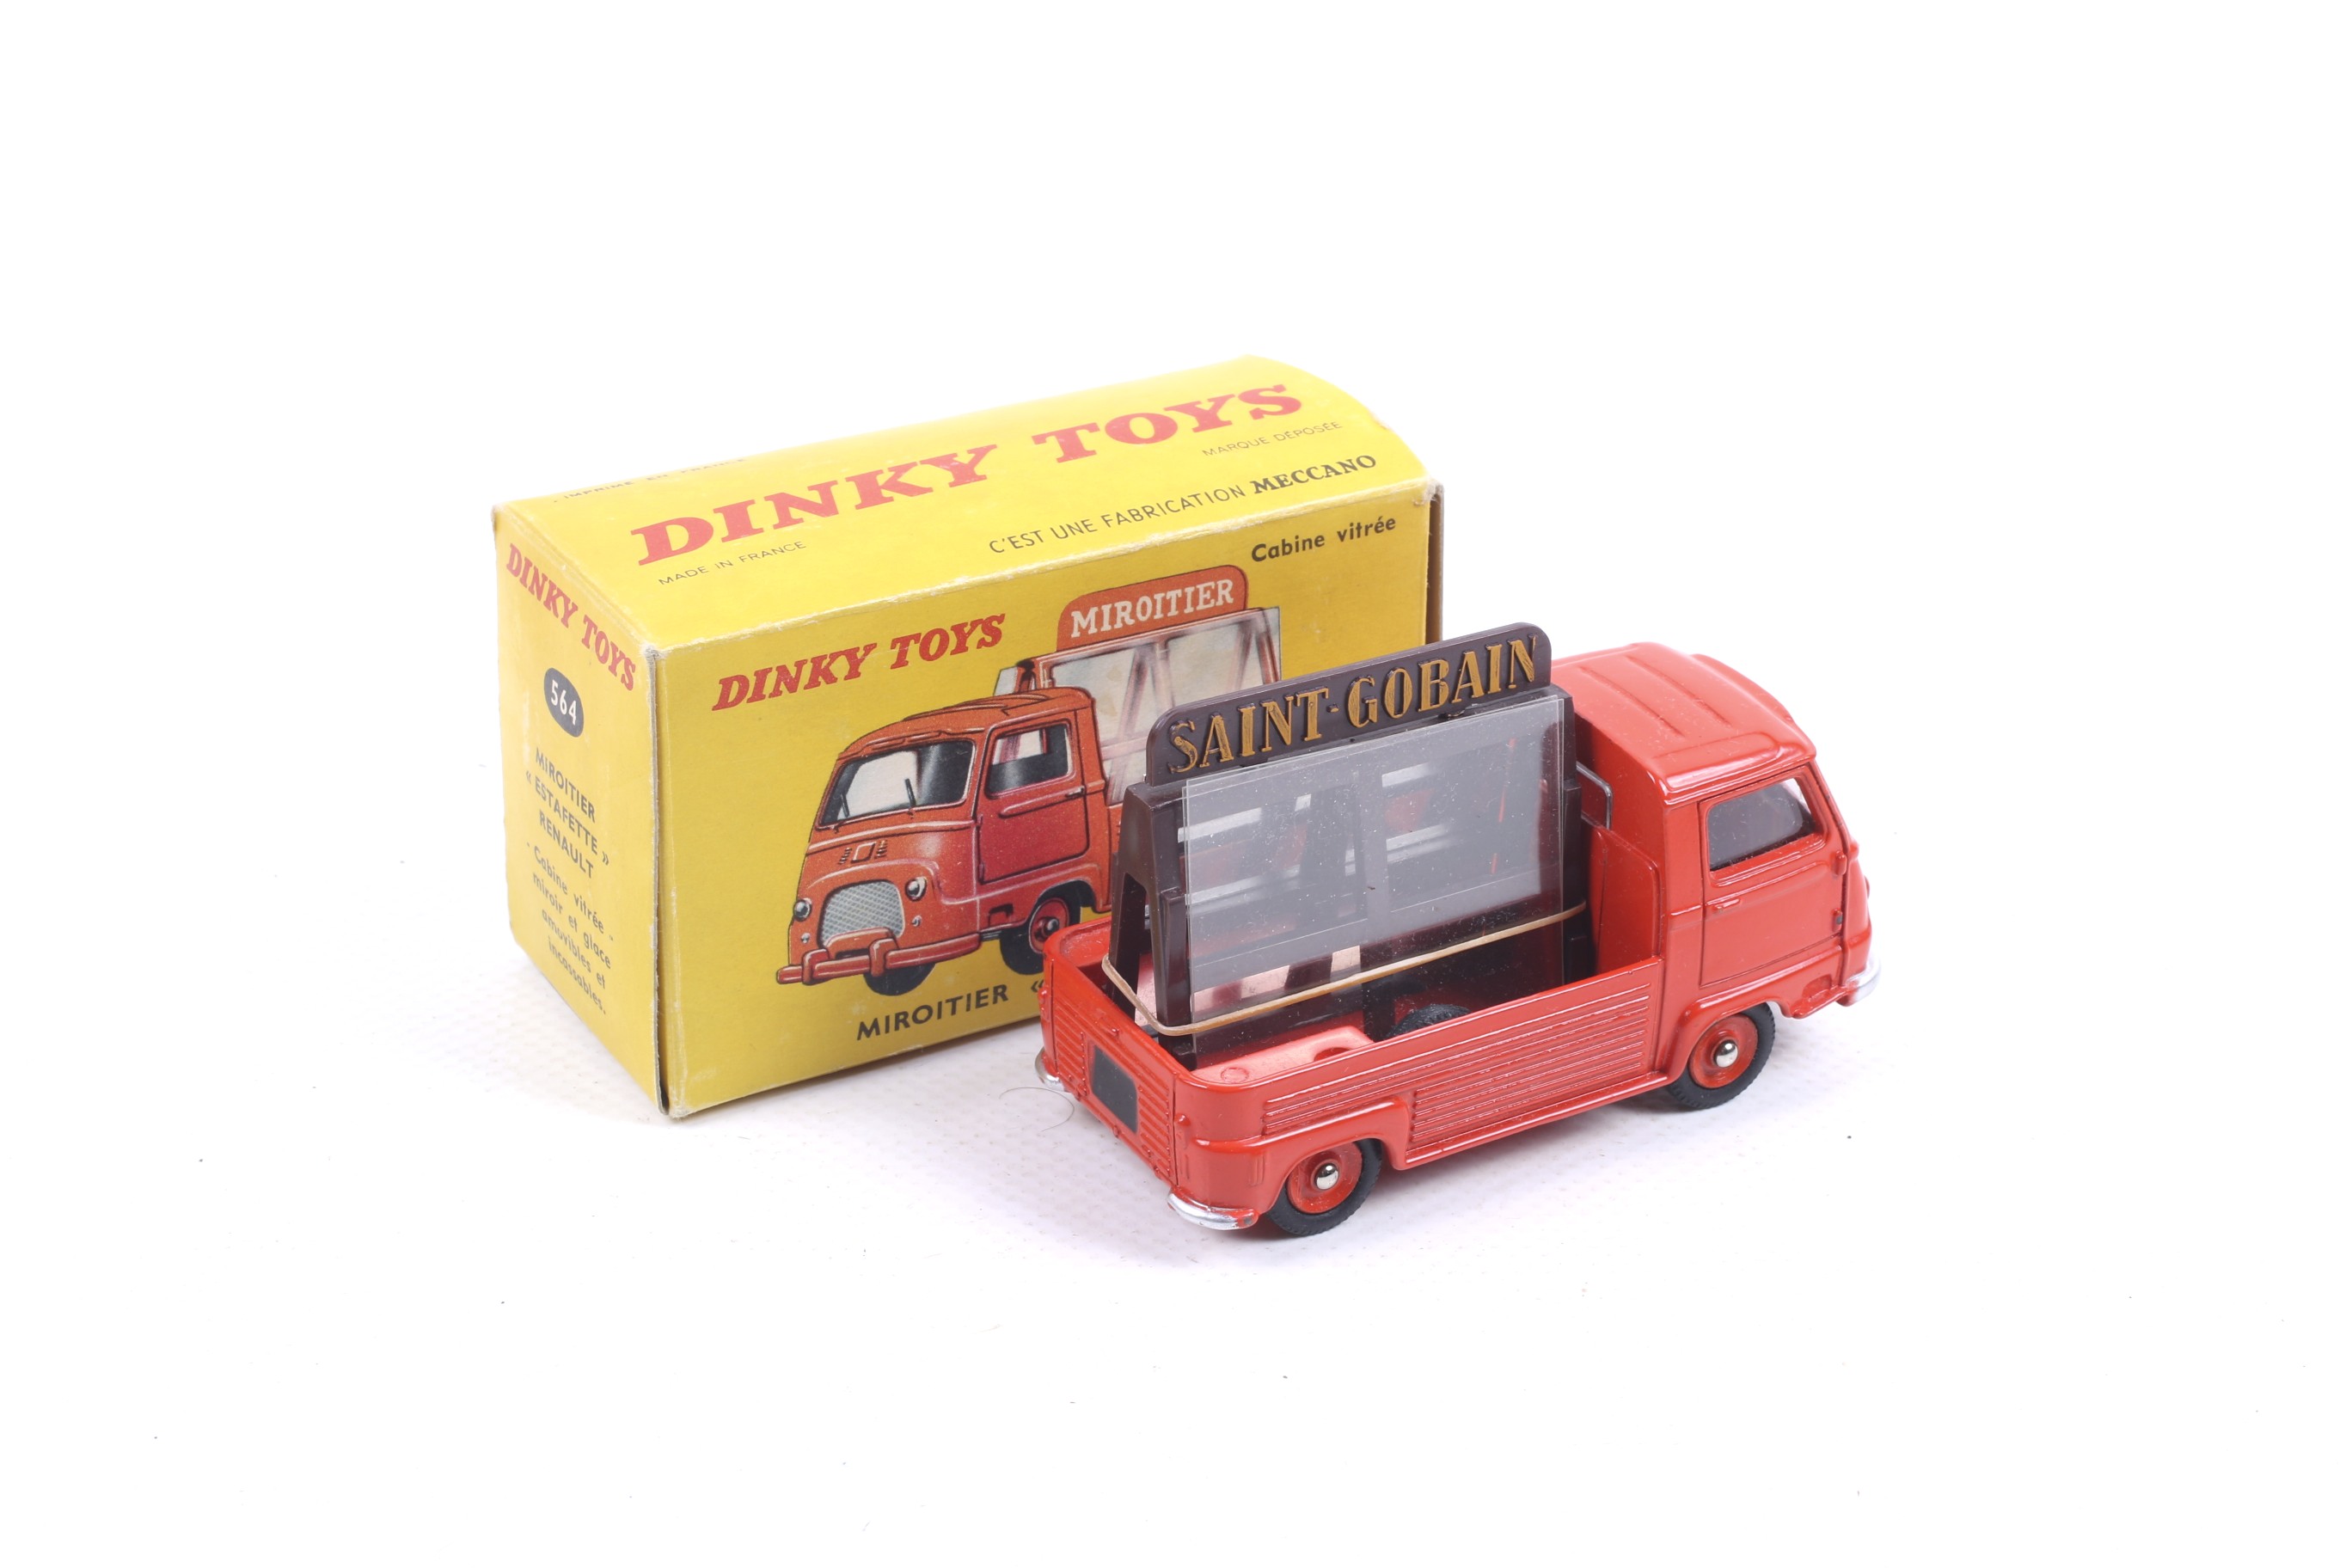 A French Dinky diecast Miroitier van. No. - Image 2 of 2